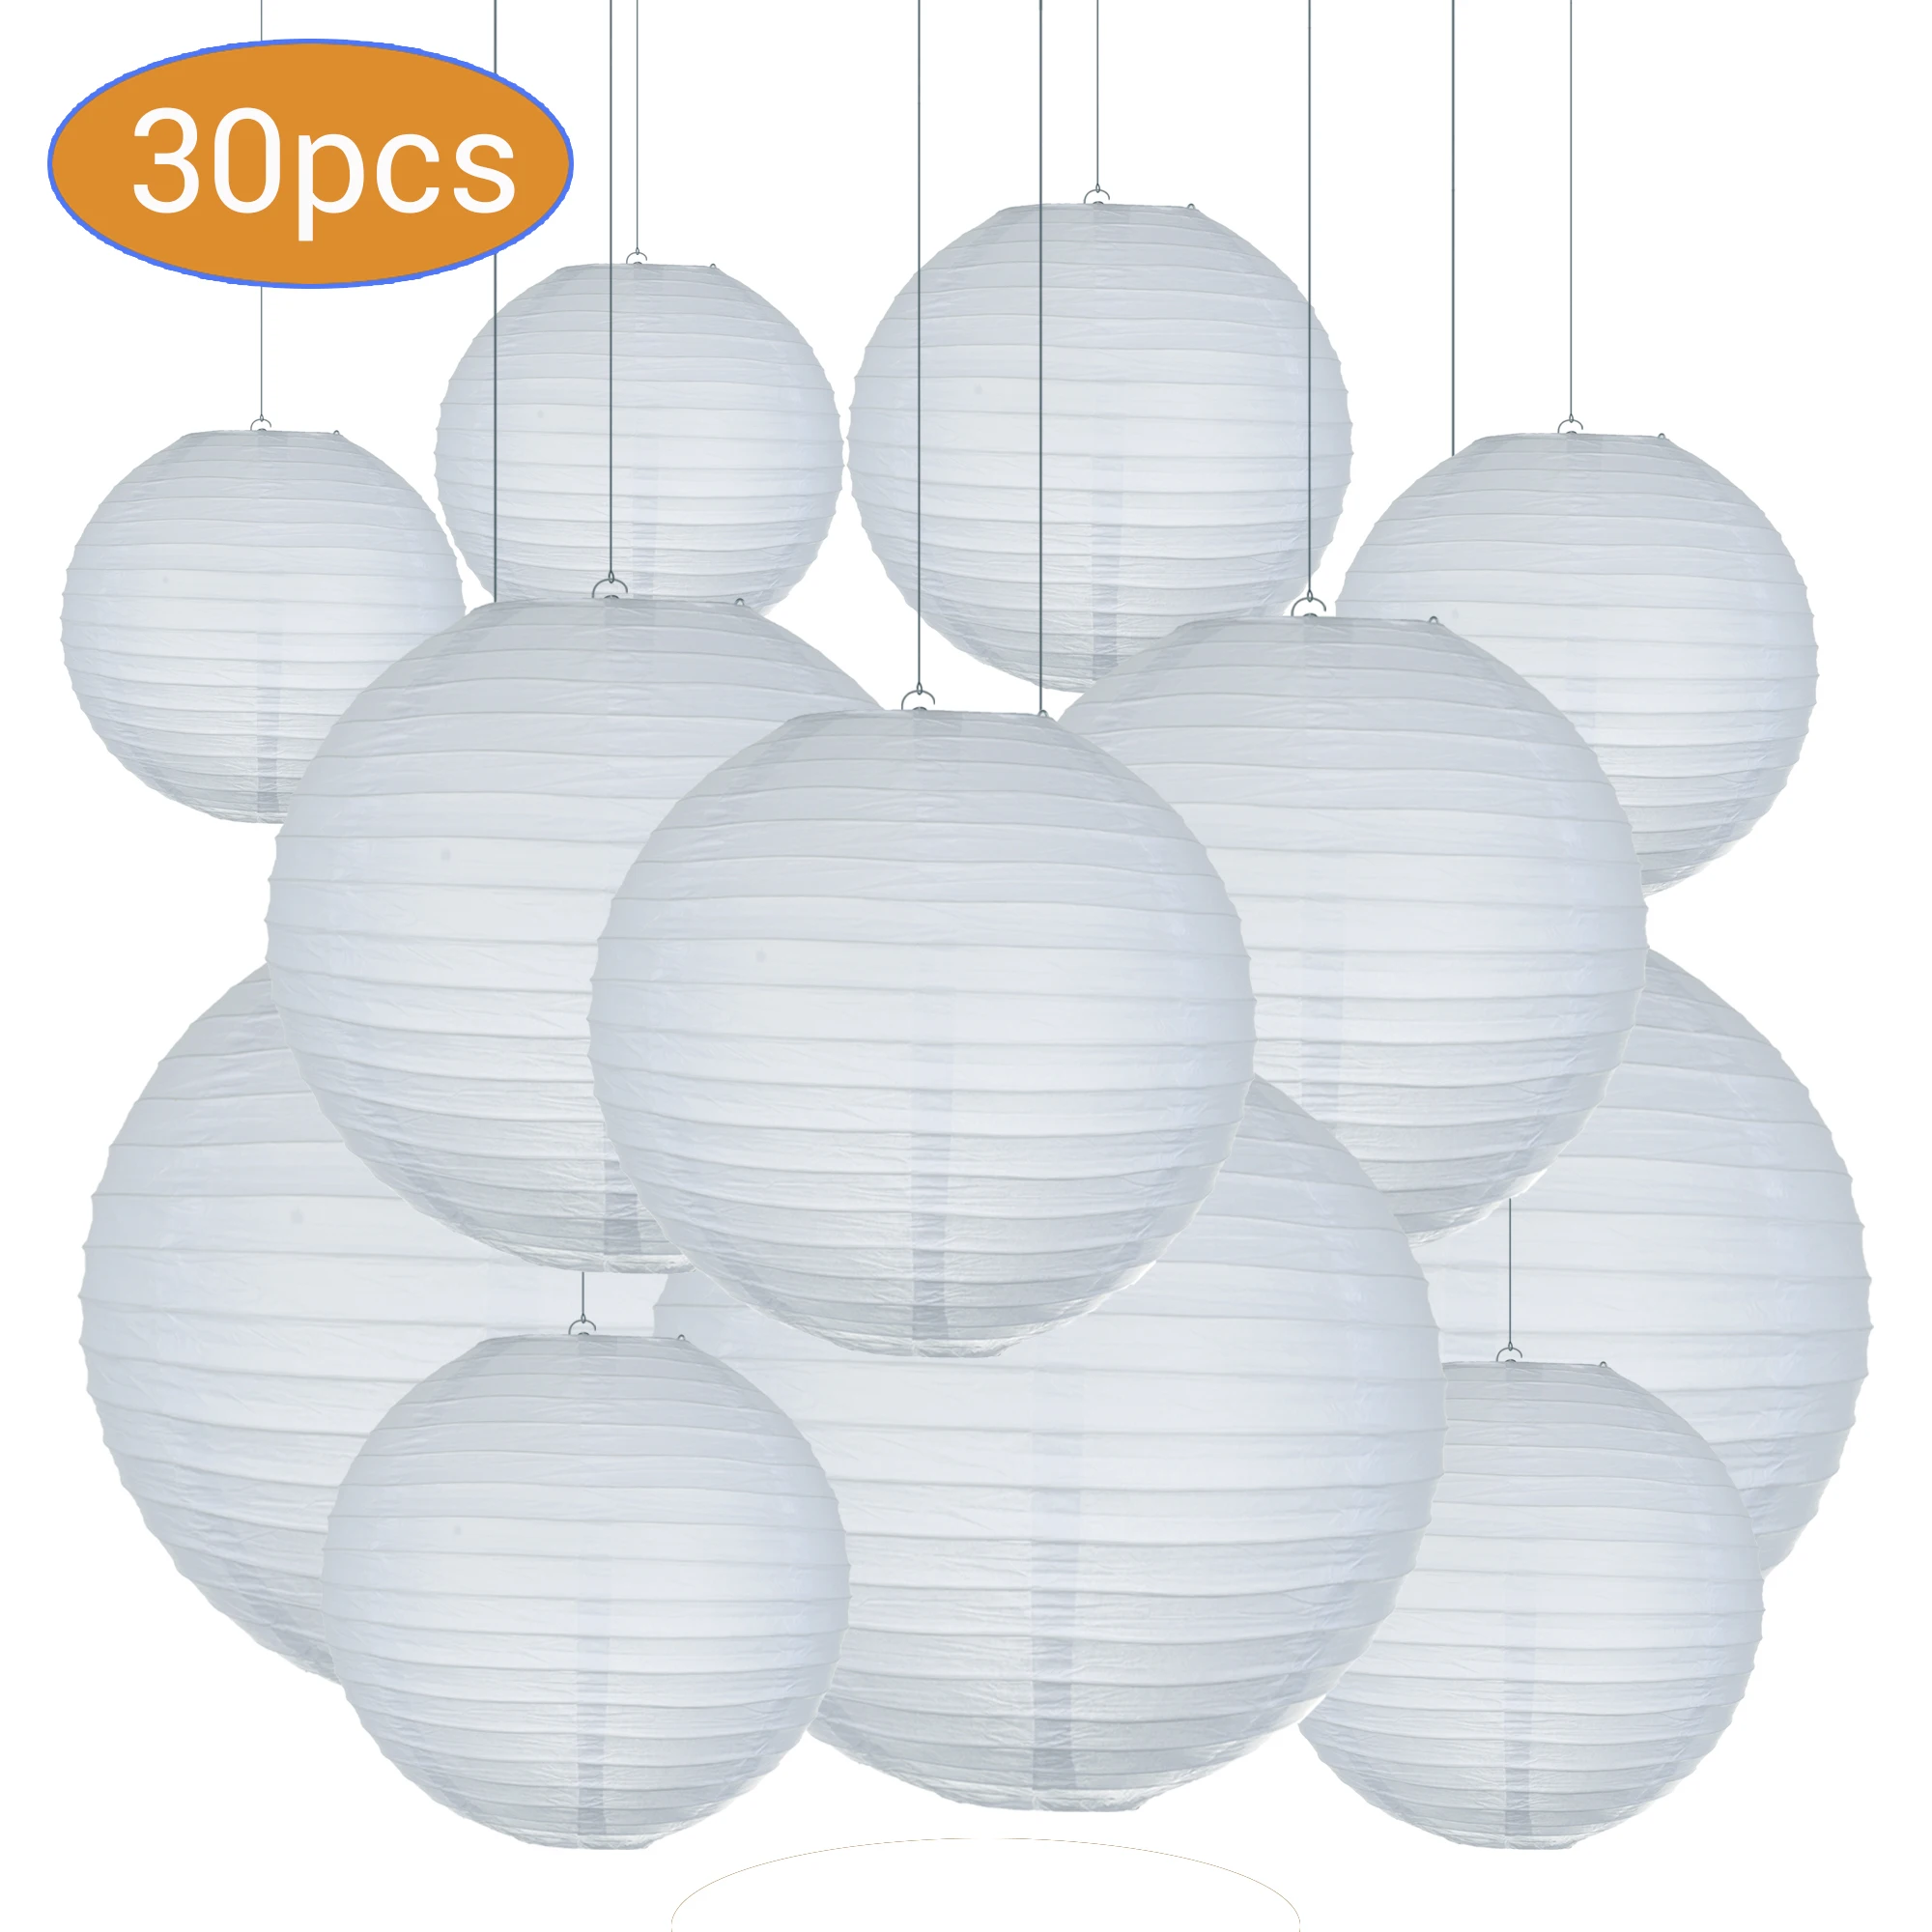 

30pcs/Lot Mix Size (15cm,20cm,25cm,30cm) White Paper Lanterns Chinese Paper Ball Lampion For Wedding Party Holiday Decoration